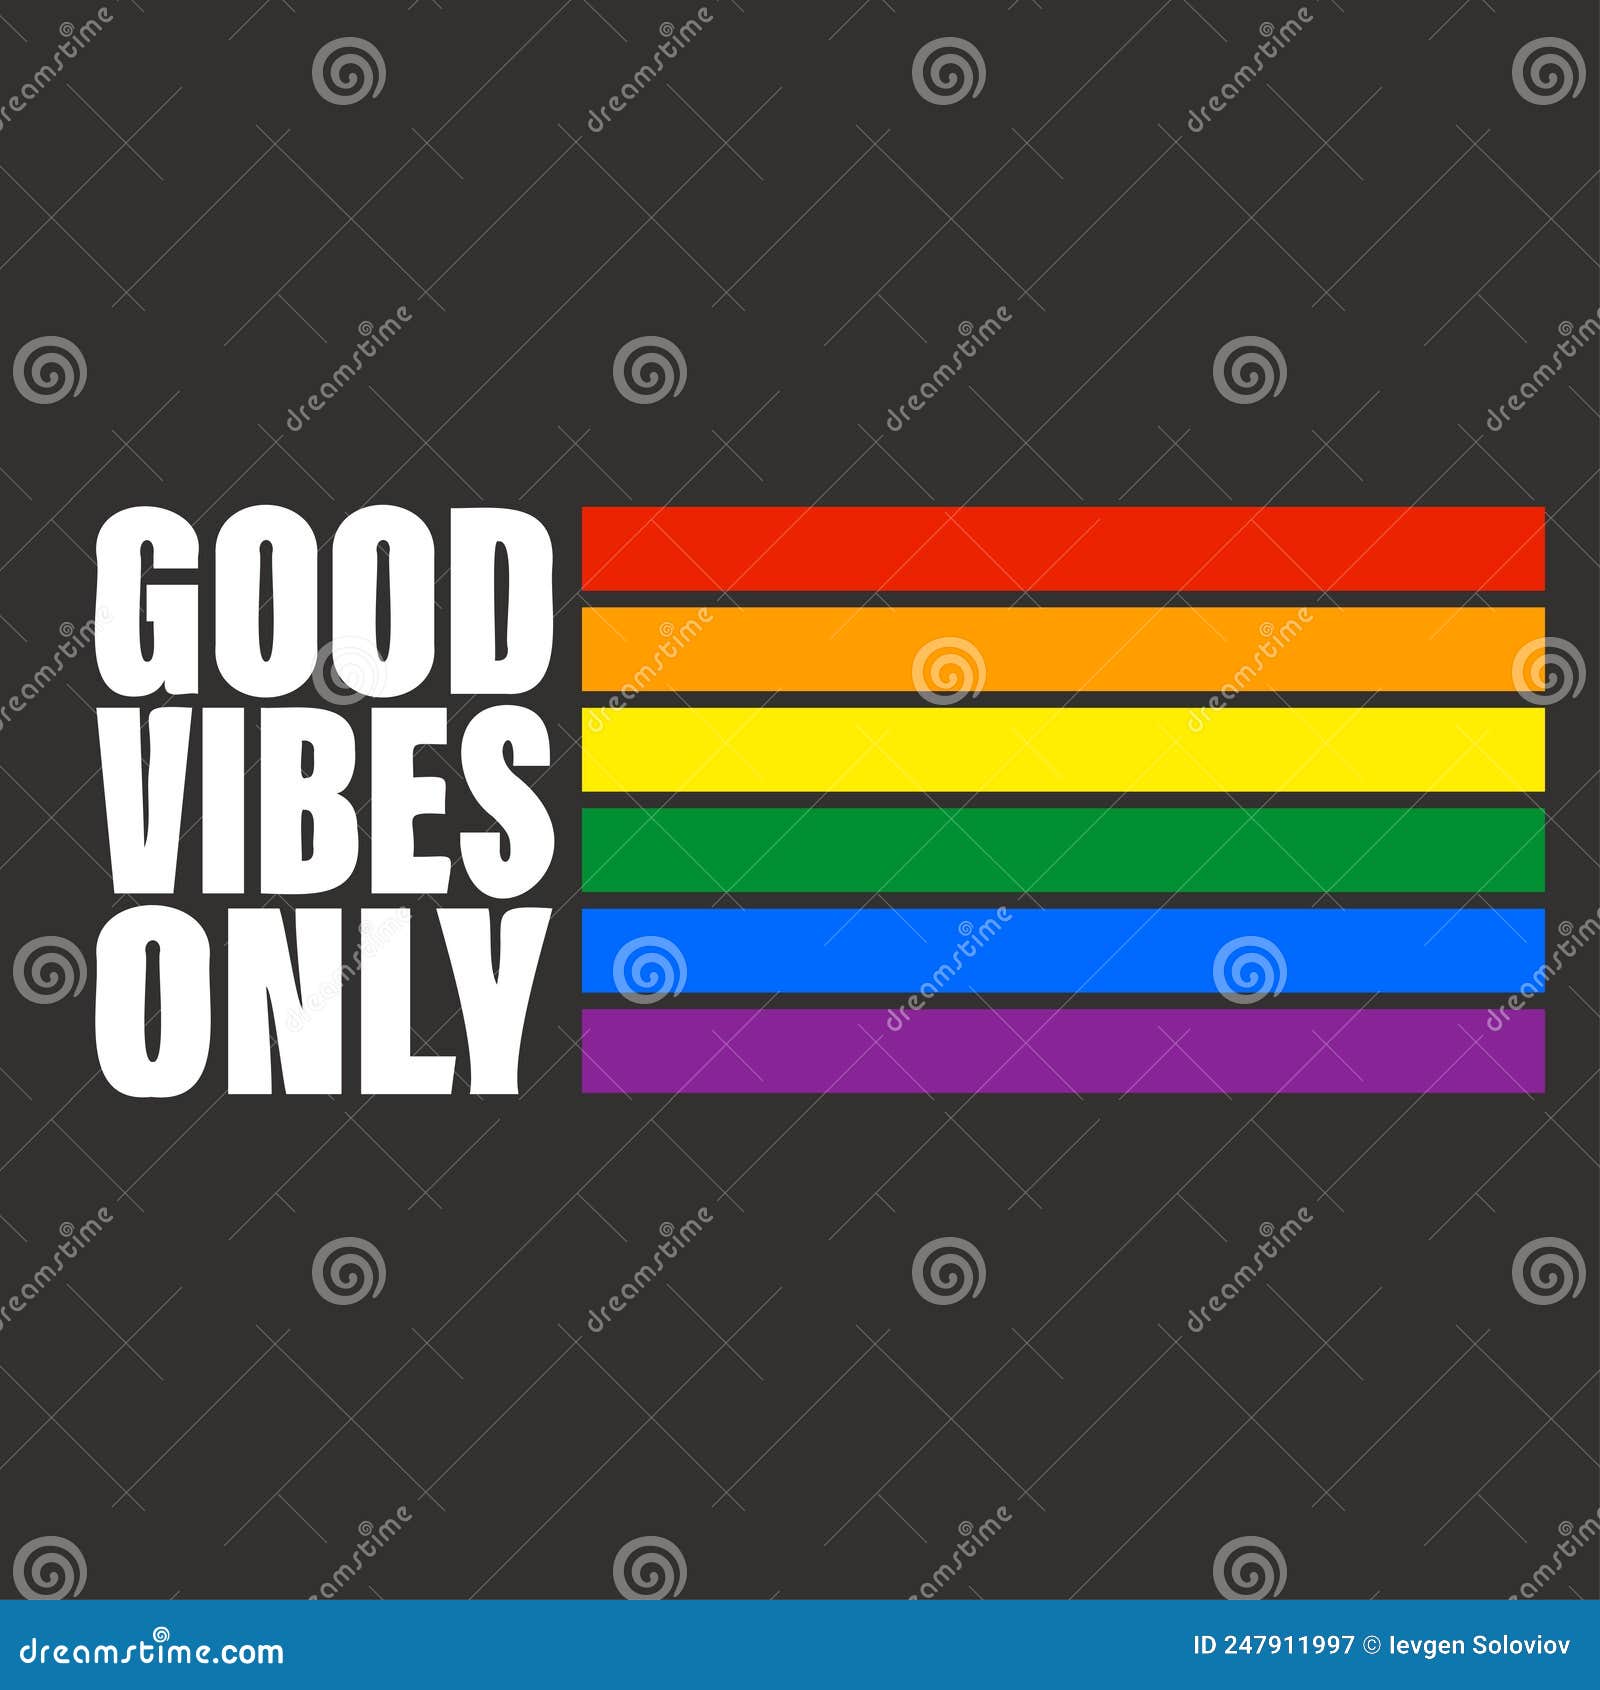 good vibes only text wallpaper